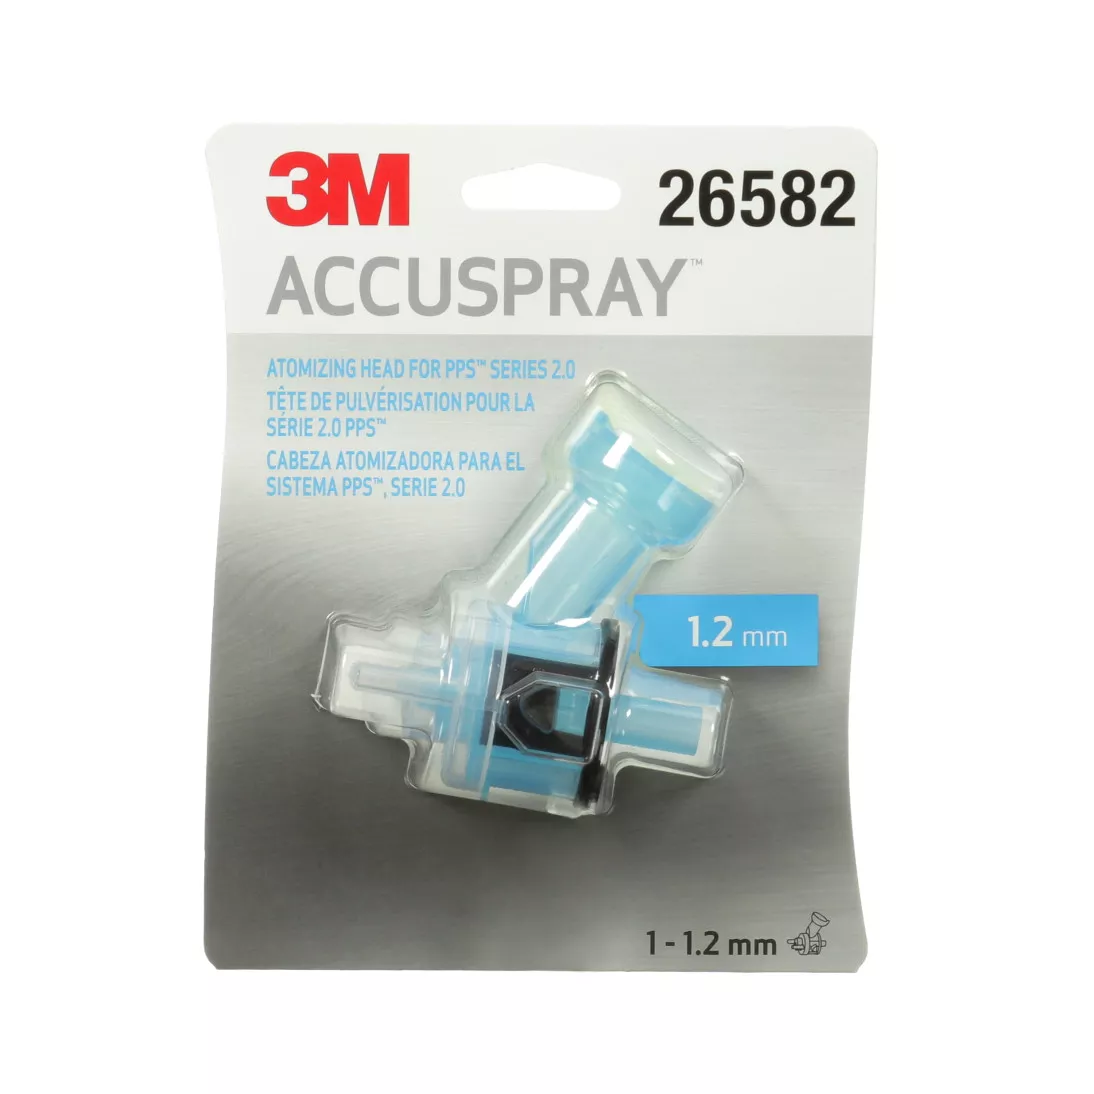 3M™ Accuspray™ Refill Pack for PPS™ Series 2.0, 26582, Blue, 1.2 mm, 5
per case